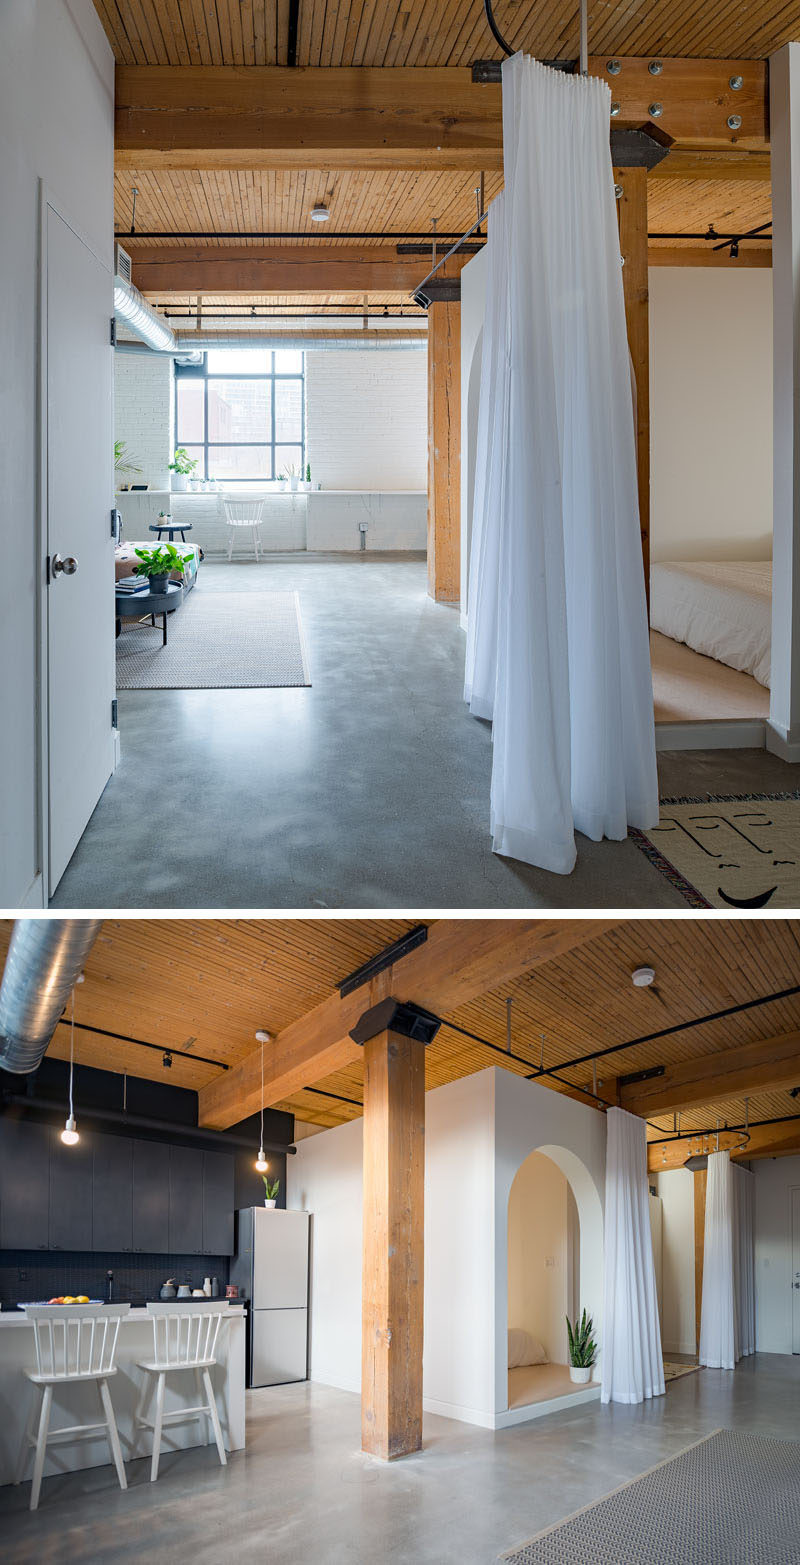 Studio AC have designed a modern loft in Toronto, Canada, for a young professional that wanted something fun, functional and unique. To achieve this, the designers used a combination of curtains and walls to create privacy and separation in the space. #ModernLoft #InteriorDesign